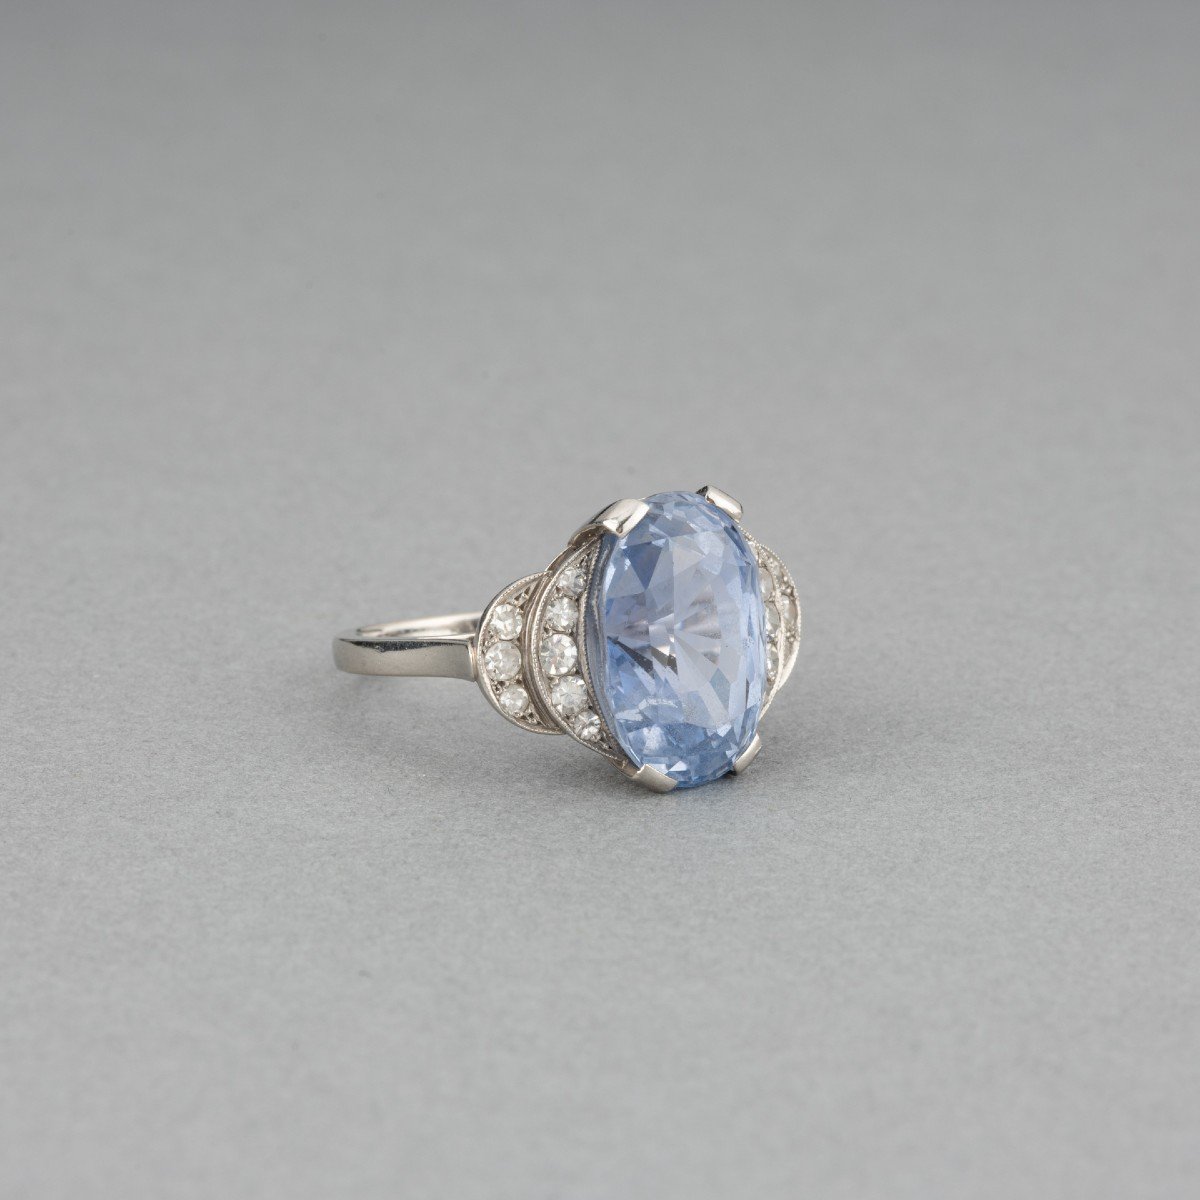 Antique French Platinum Ring With Diamonds And Certified Ceylon Sapphire Of 9.84 Carats-photo-1